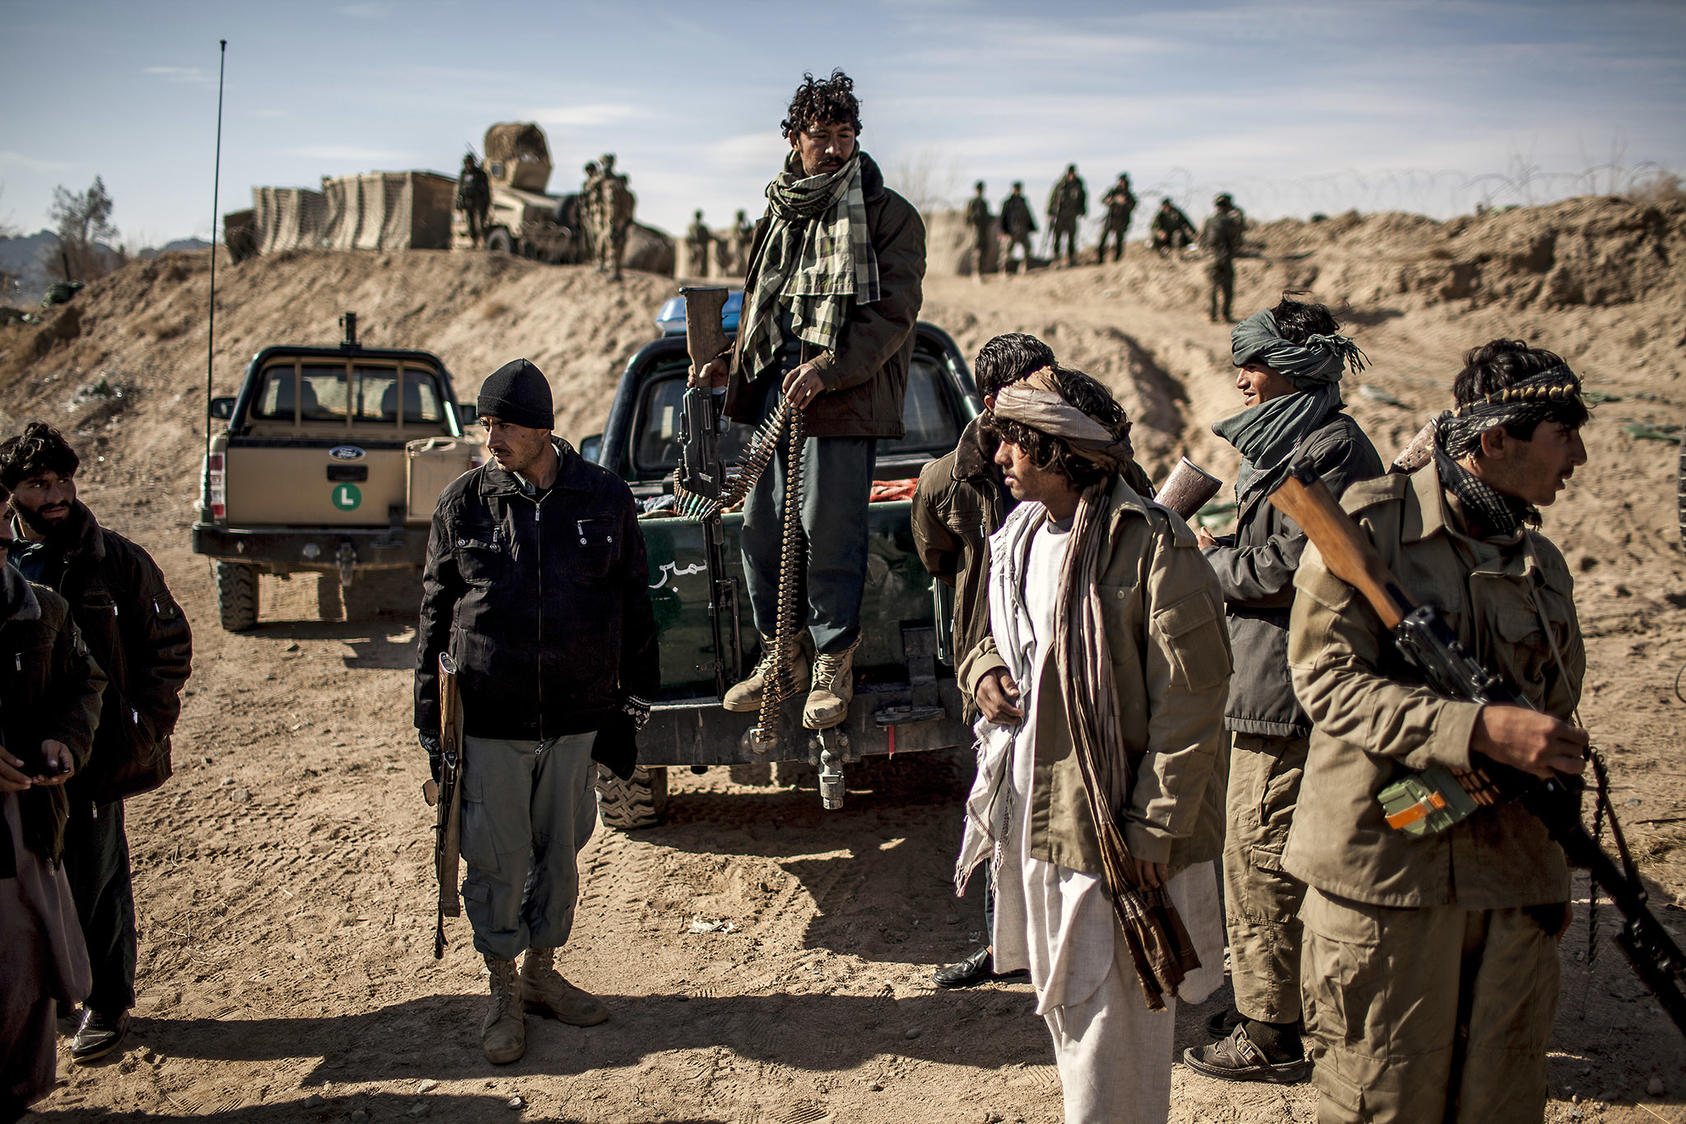 Local Afghan police in Kakeran, Afghanistan, Feb. 18, 2013. While some militias the U.S. helped create — to protect areas from the Taliban as the American military reduced its footprint in the country — are operating as hoped, others have a reputation for abuse and banditry. (Bryan Denton/The New York Times)